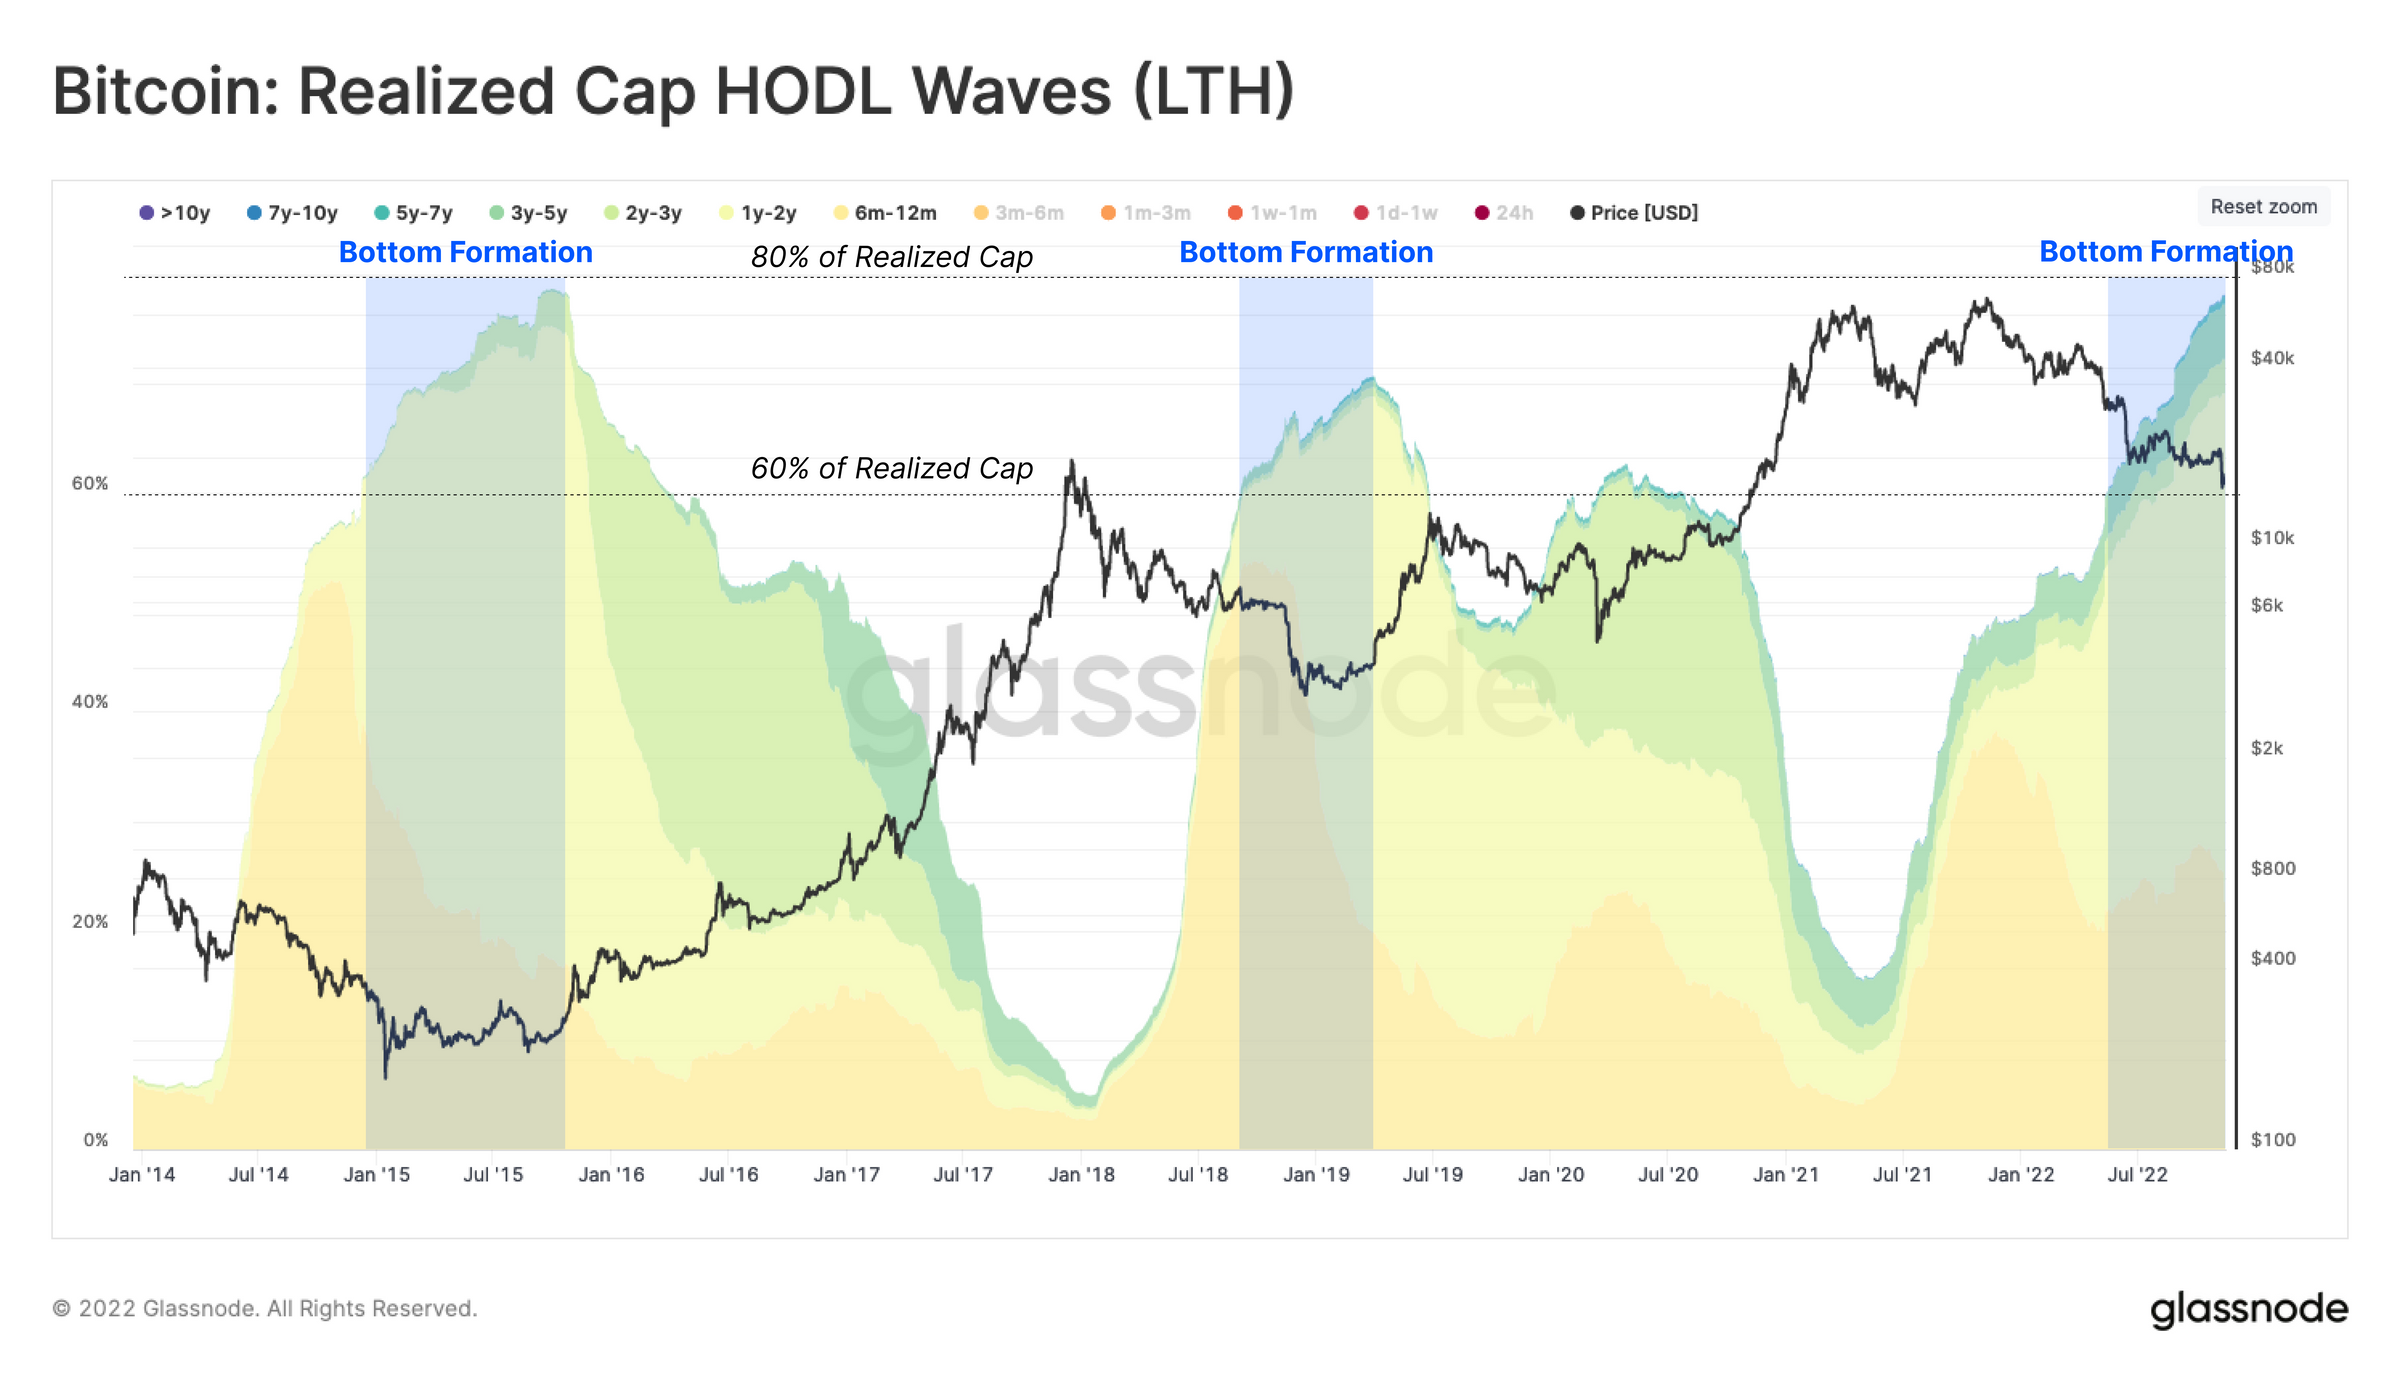 Realized Cap HODL Waves